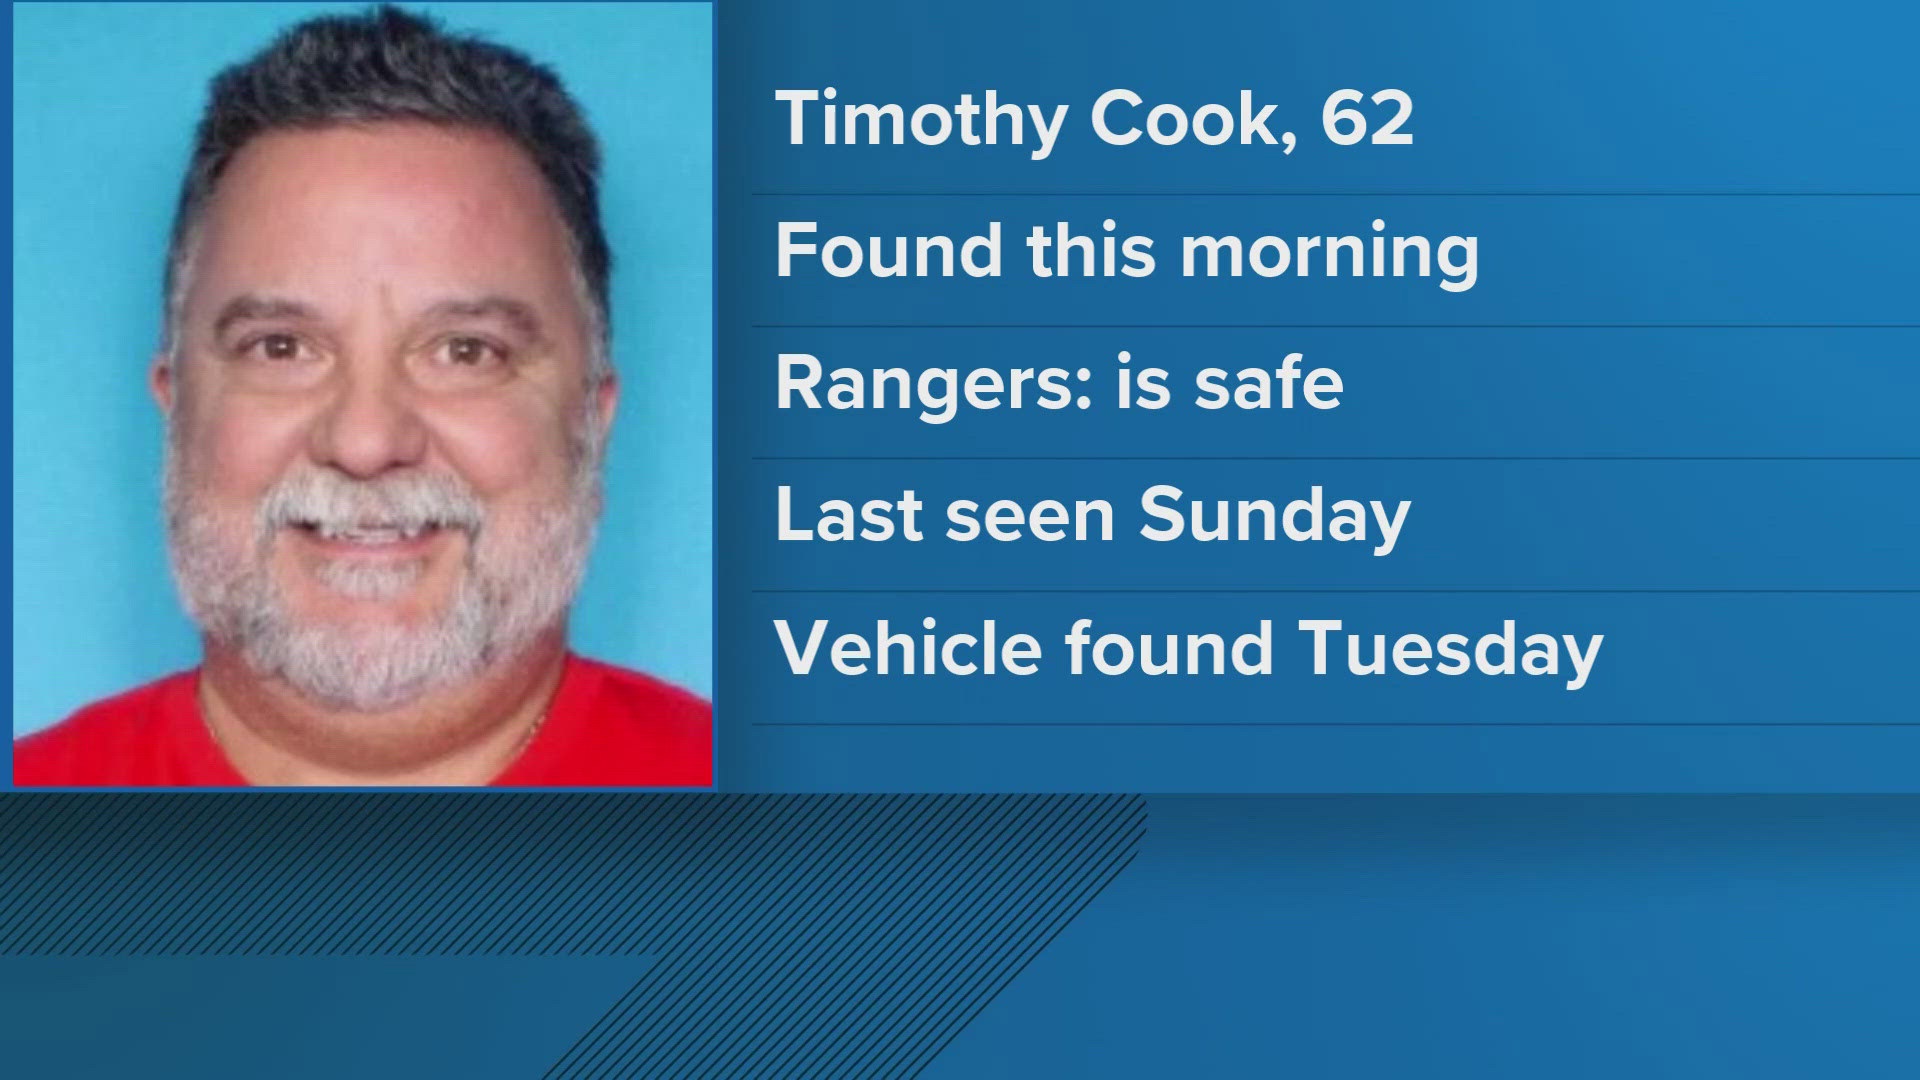 According to the National Park Service, Timothy Cook was found Friday morning after he was last seen near the Chimney Tops overlook on Sunday.